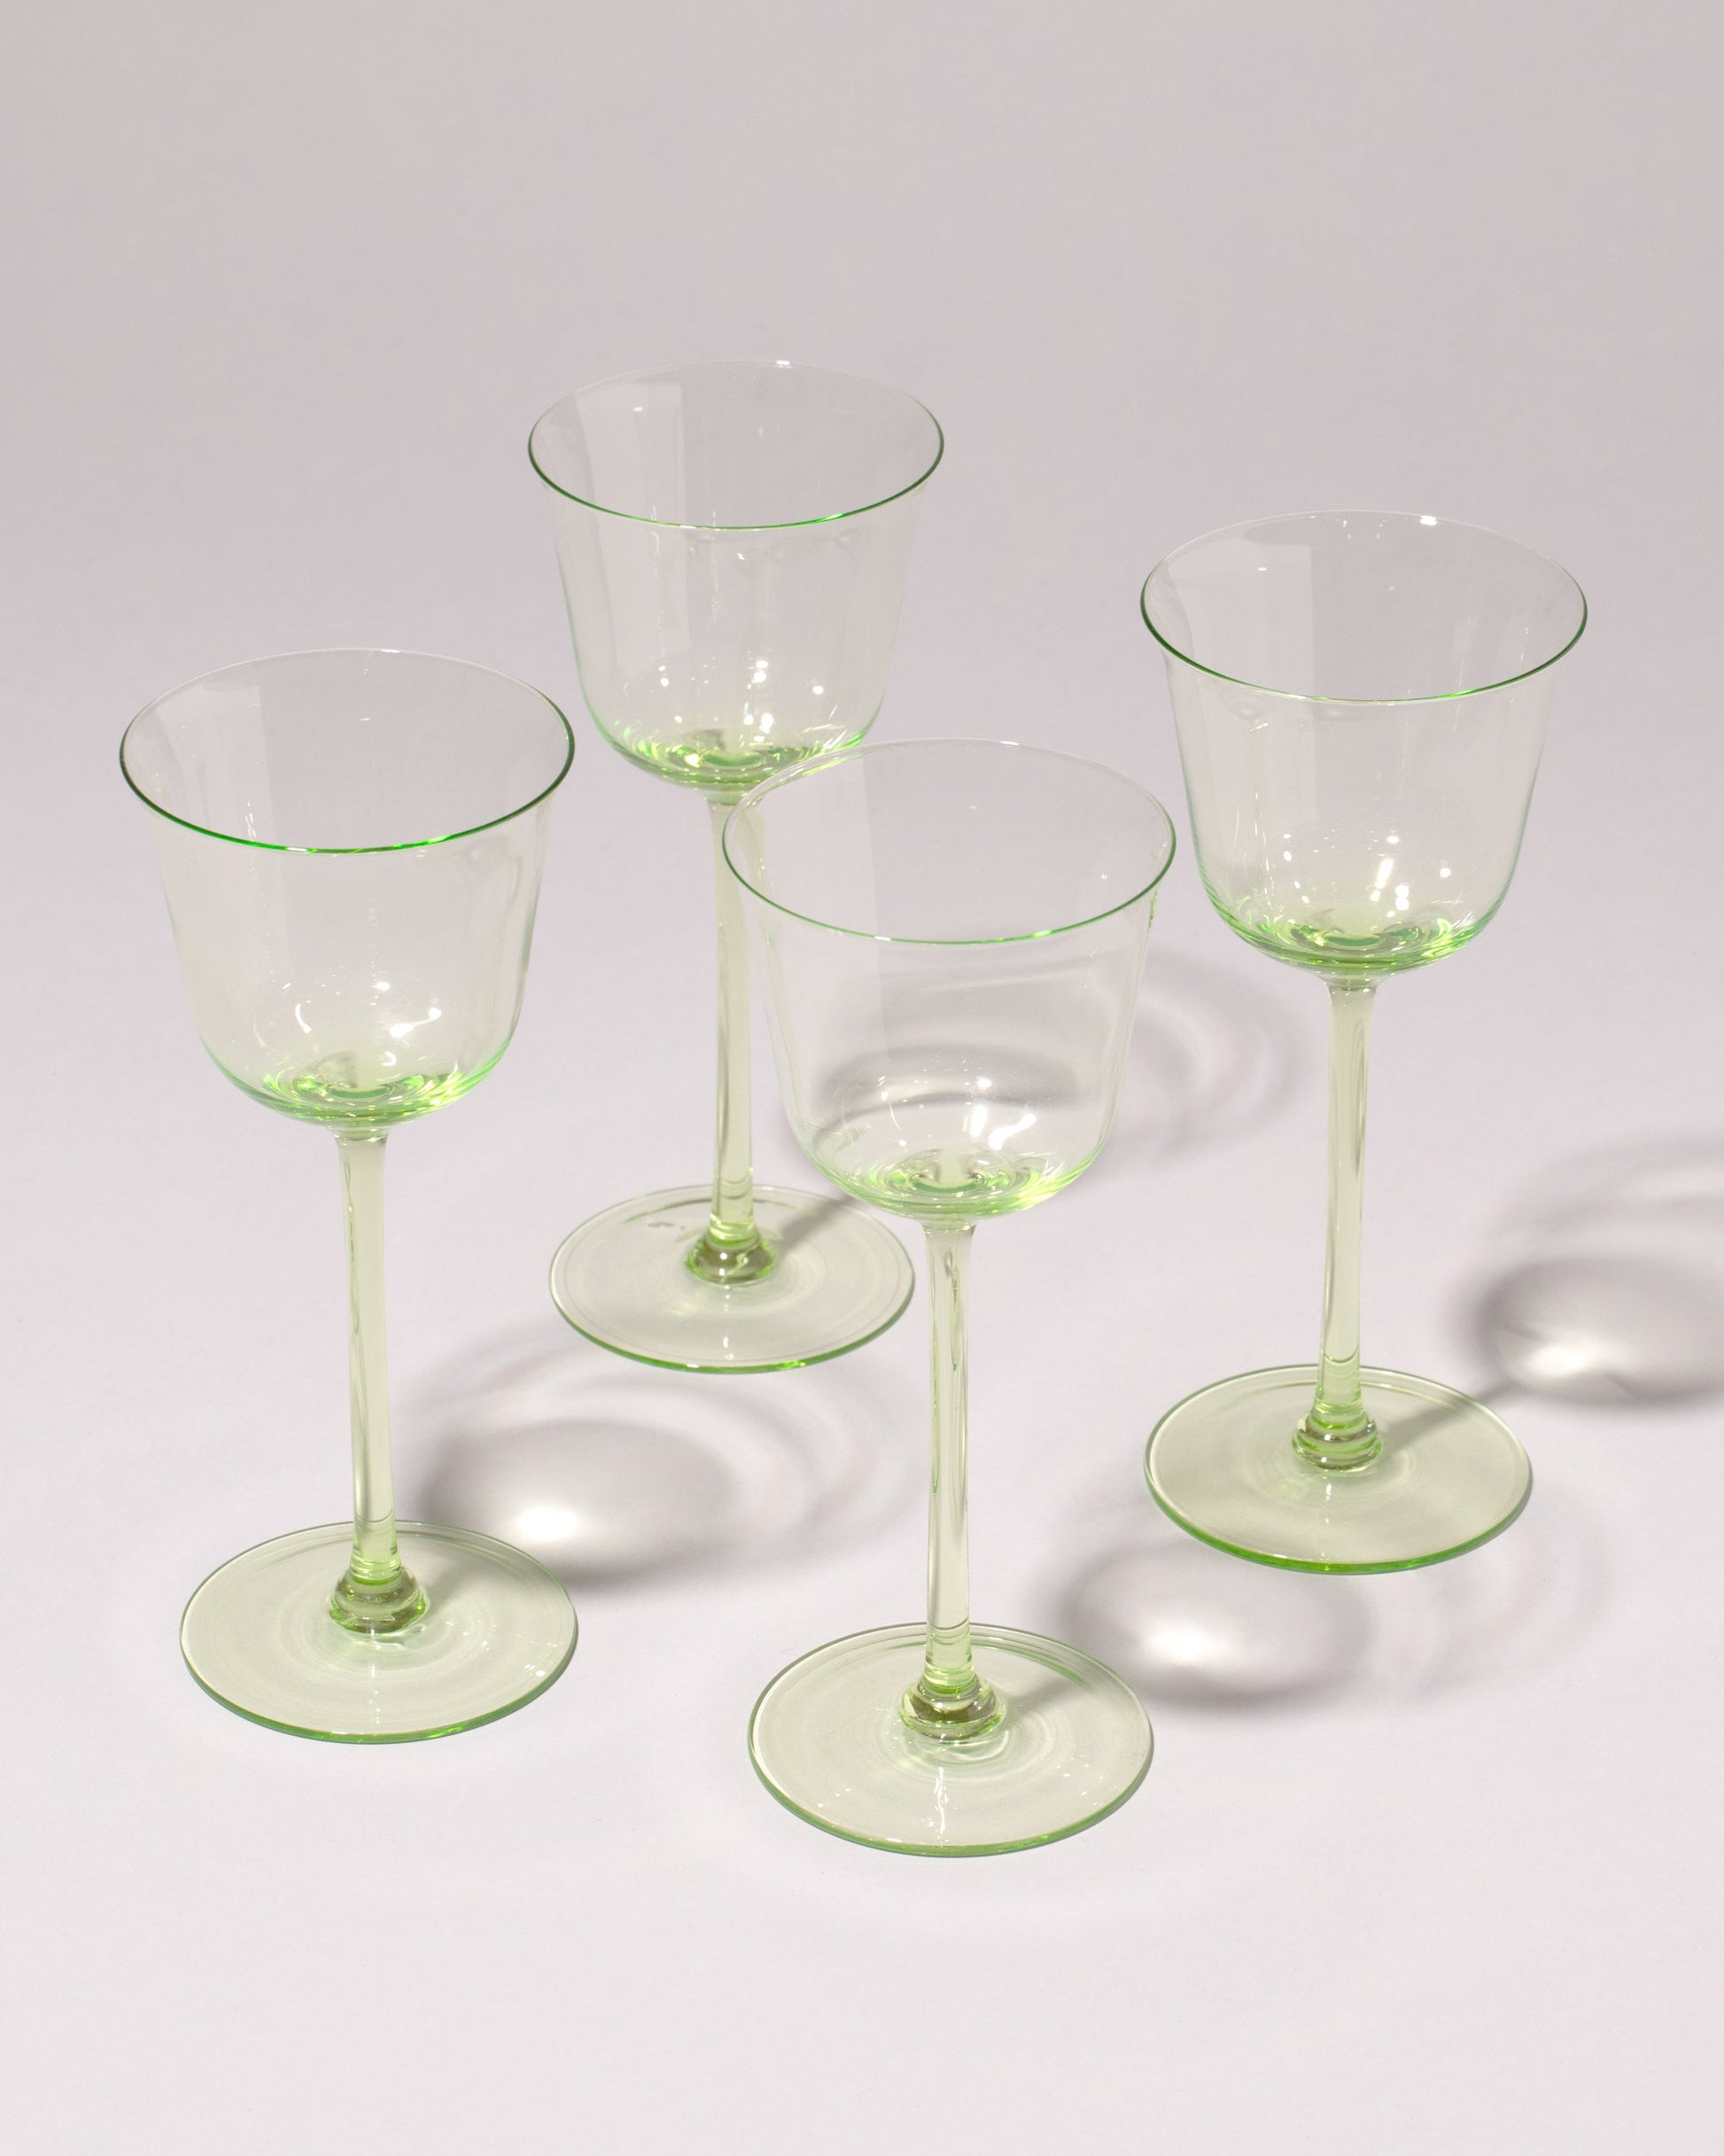 Closeup details of a group of Serax Grace Wine Glasses by Ann Demeulemeester on light color background.